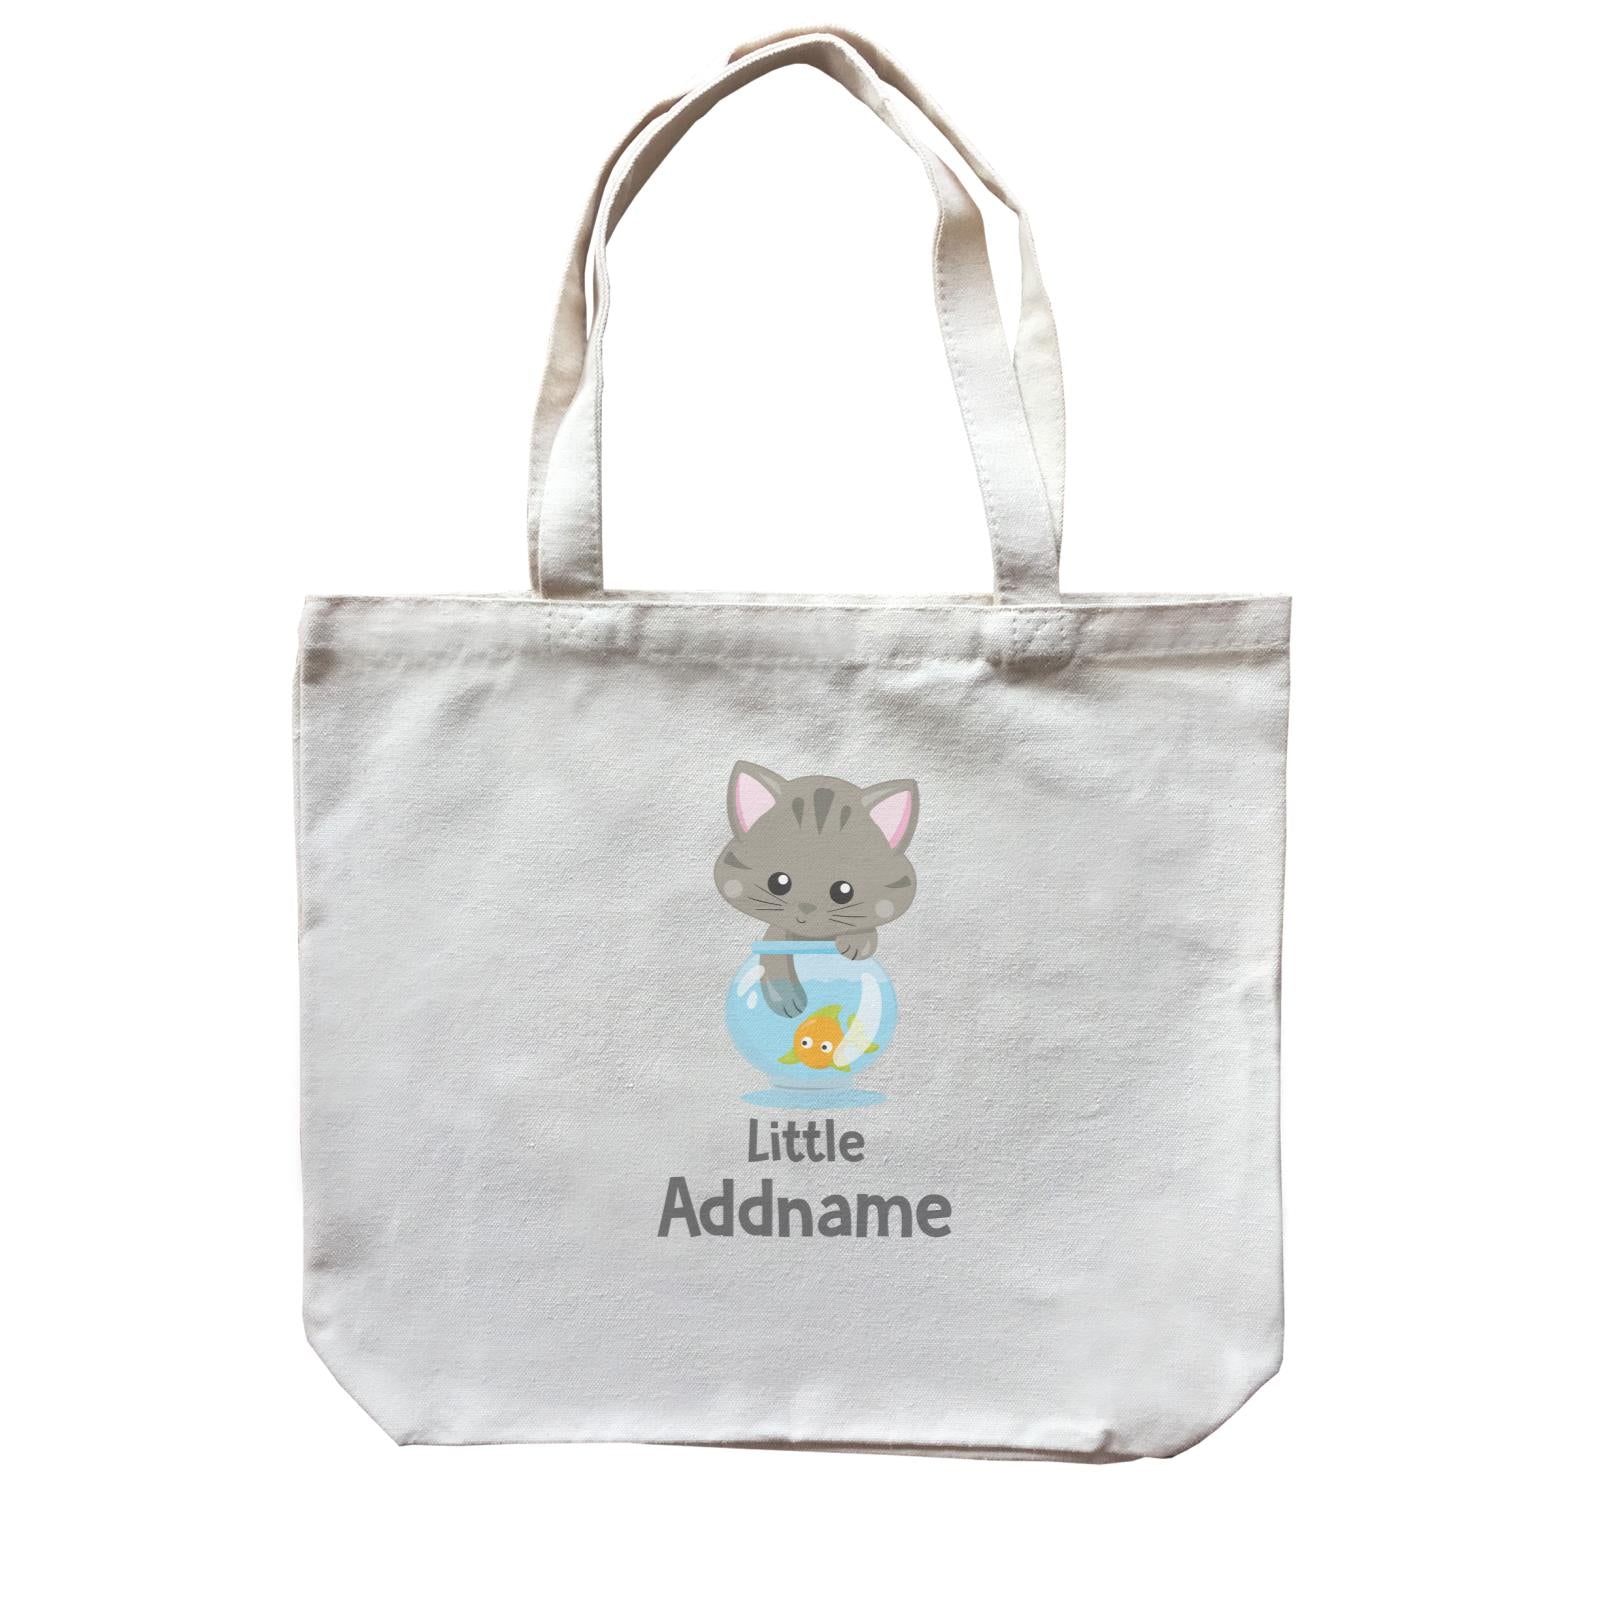 Adorable Cats Grey Cat Playing With Fish Bowl Little Addname Canvas Bag